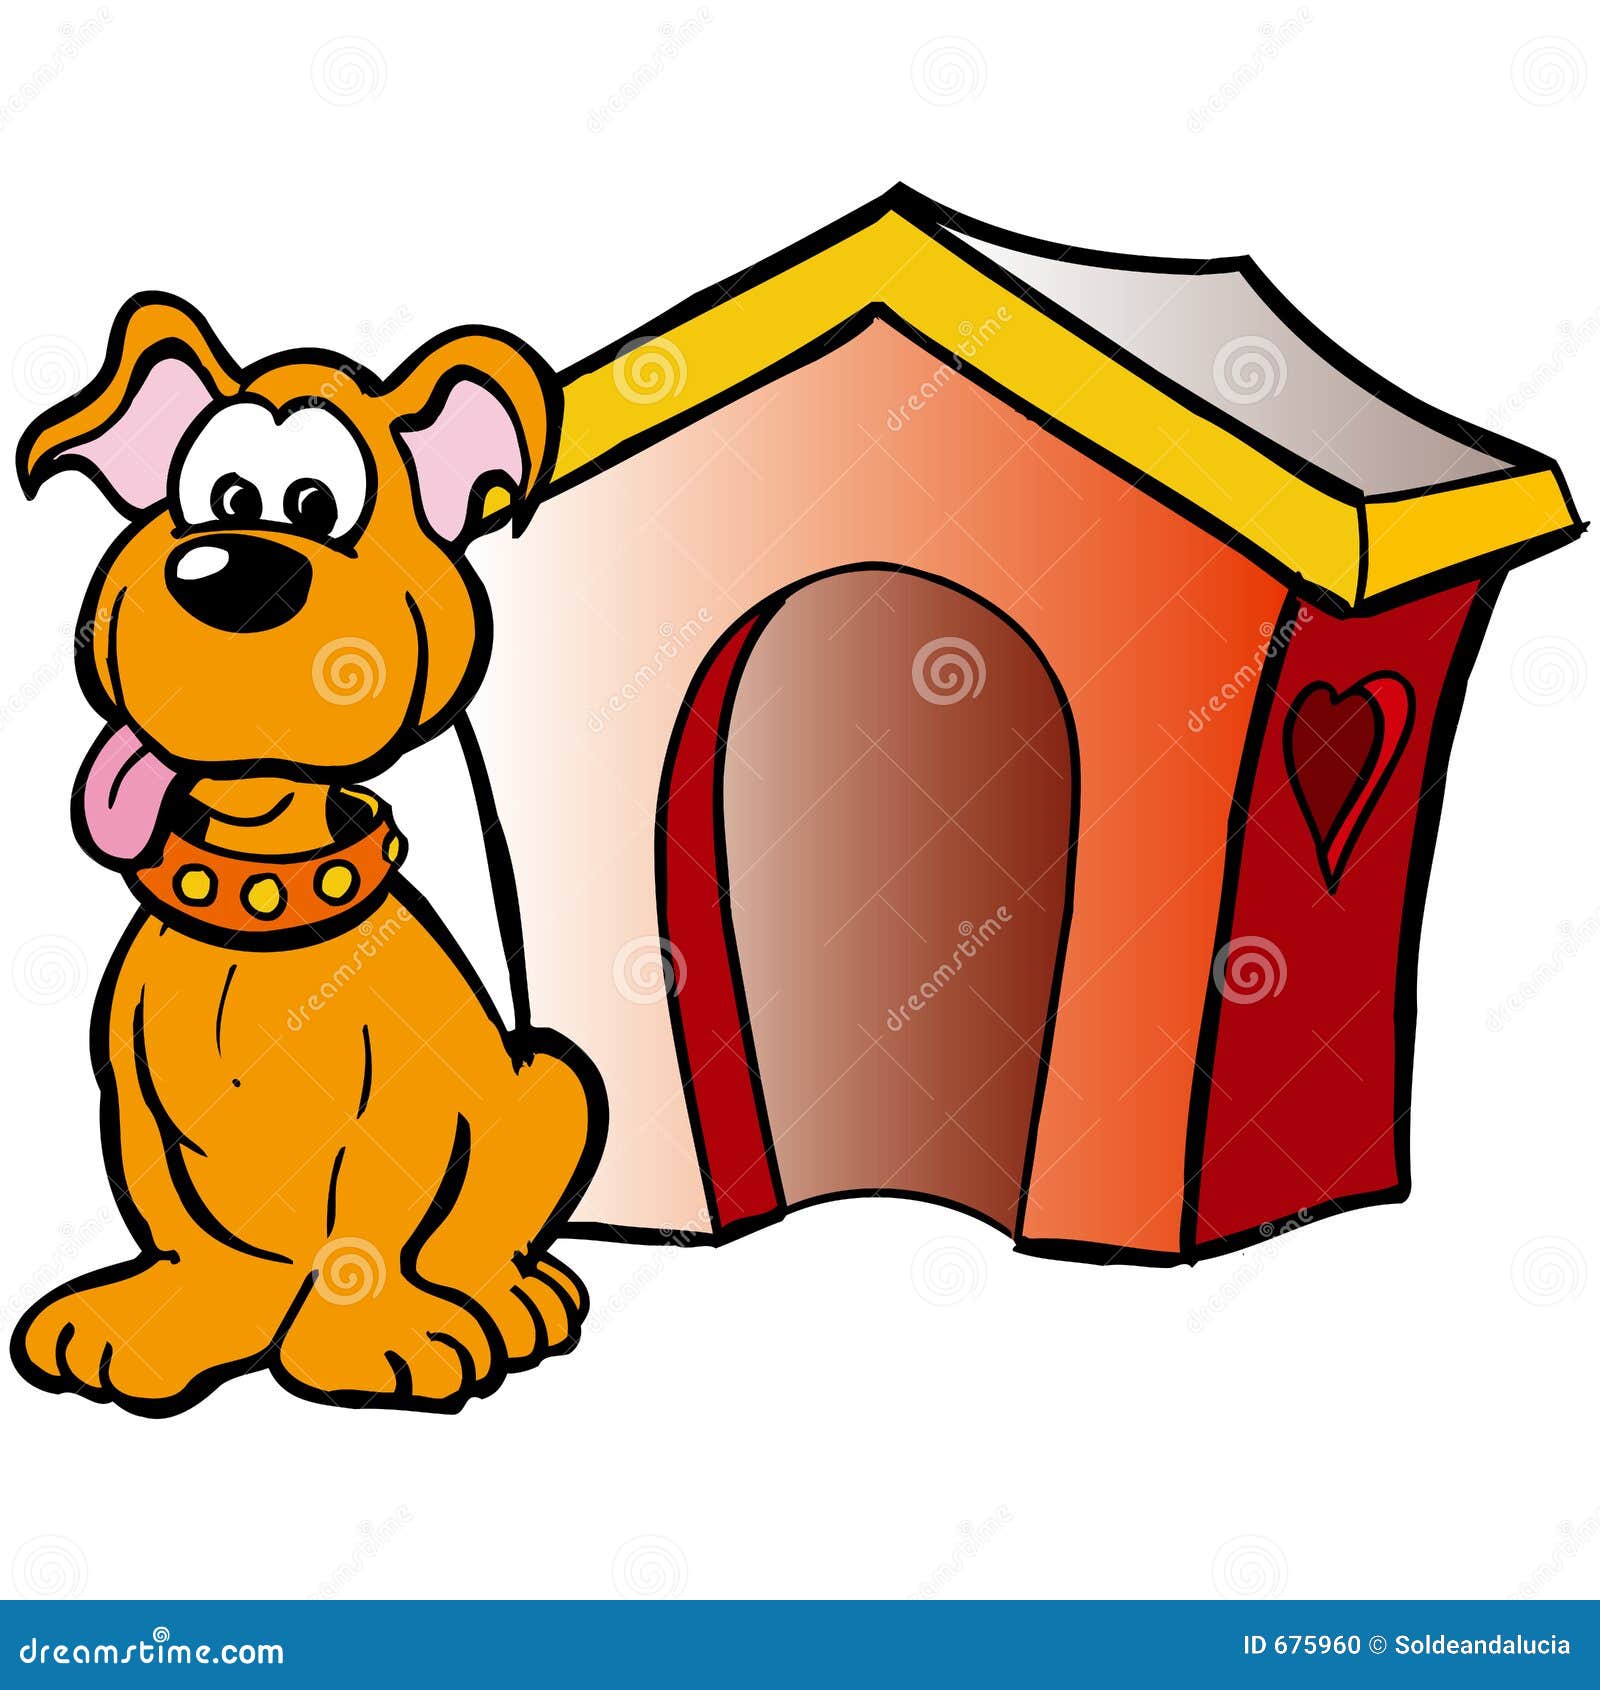 dog house clipart images - photo #23